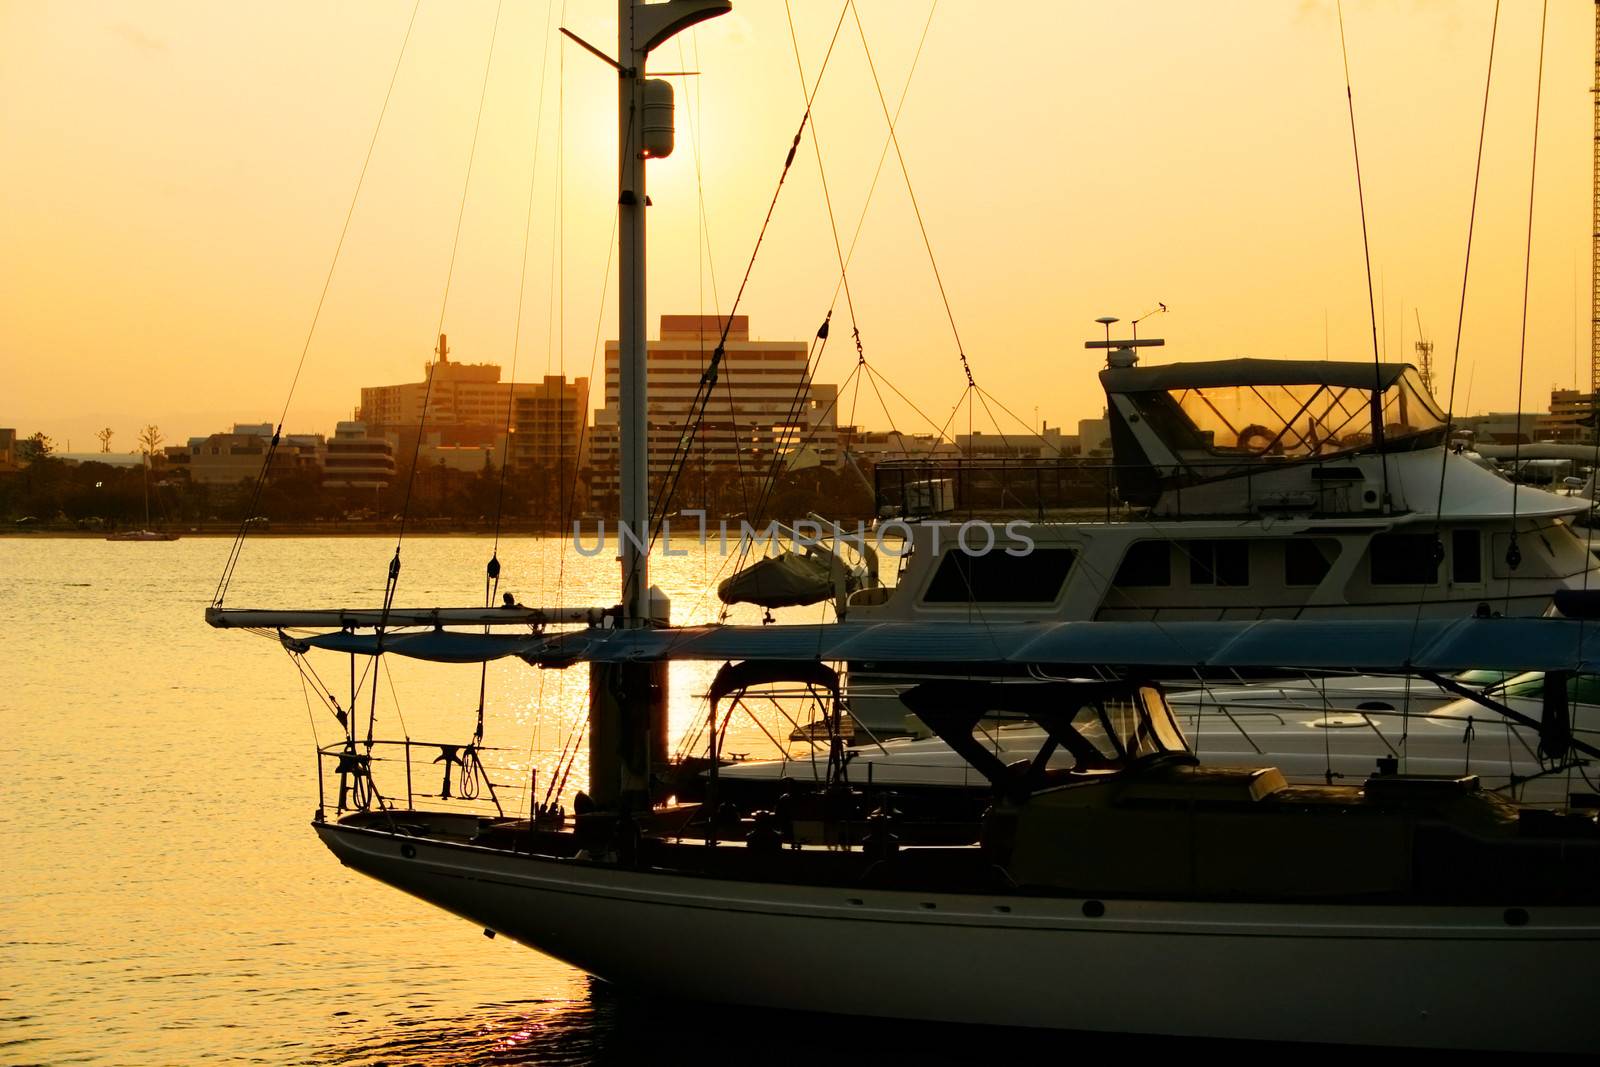 Yachts moored at marina with the sun setting over the skyline.